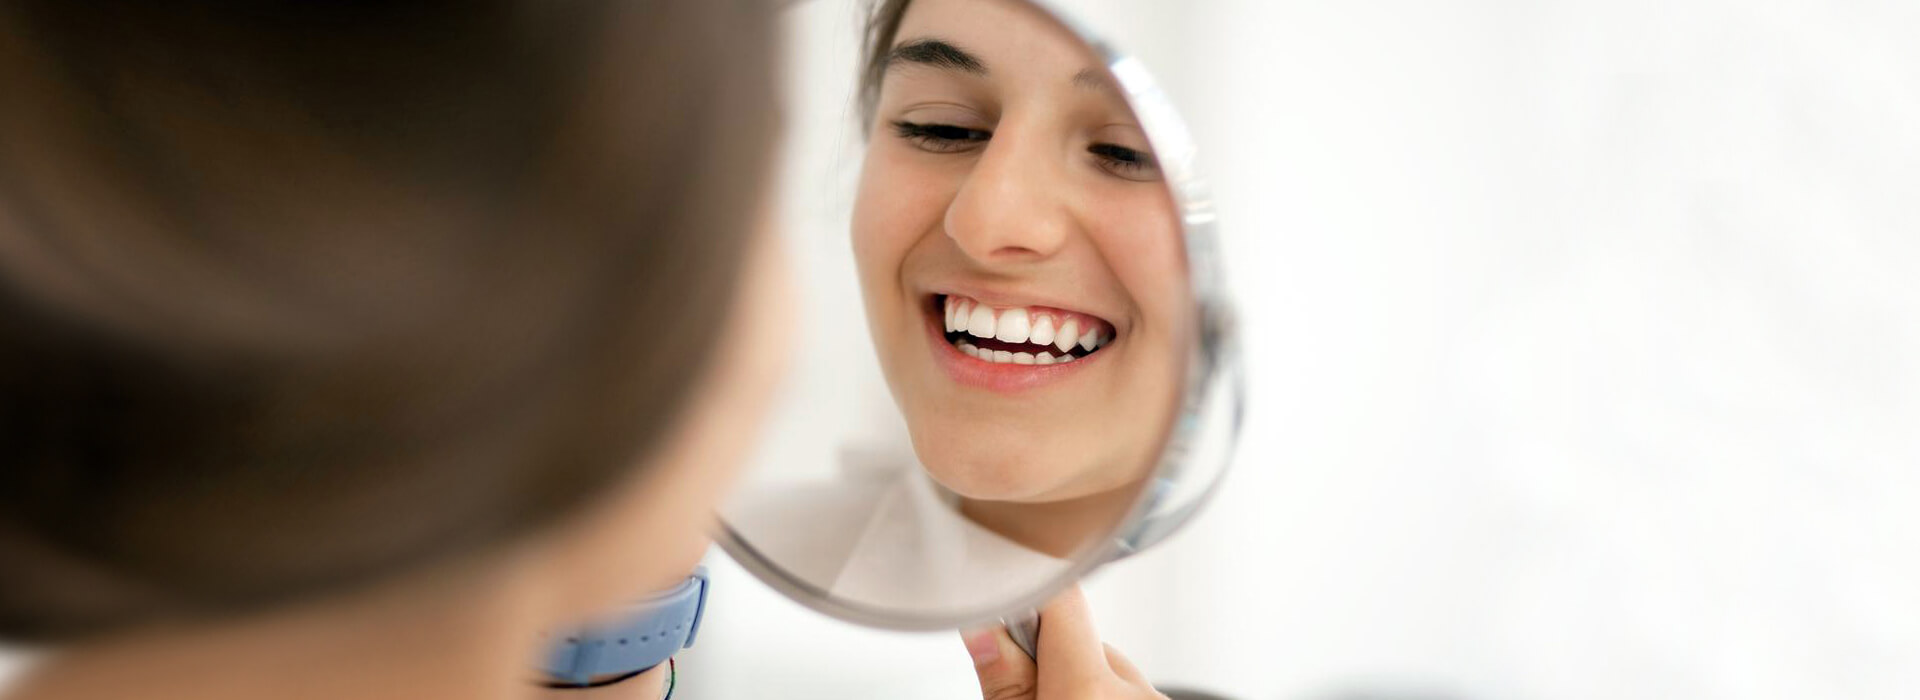 10 Amazing Hacks for a Healthy Smile